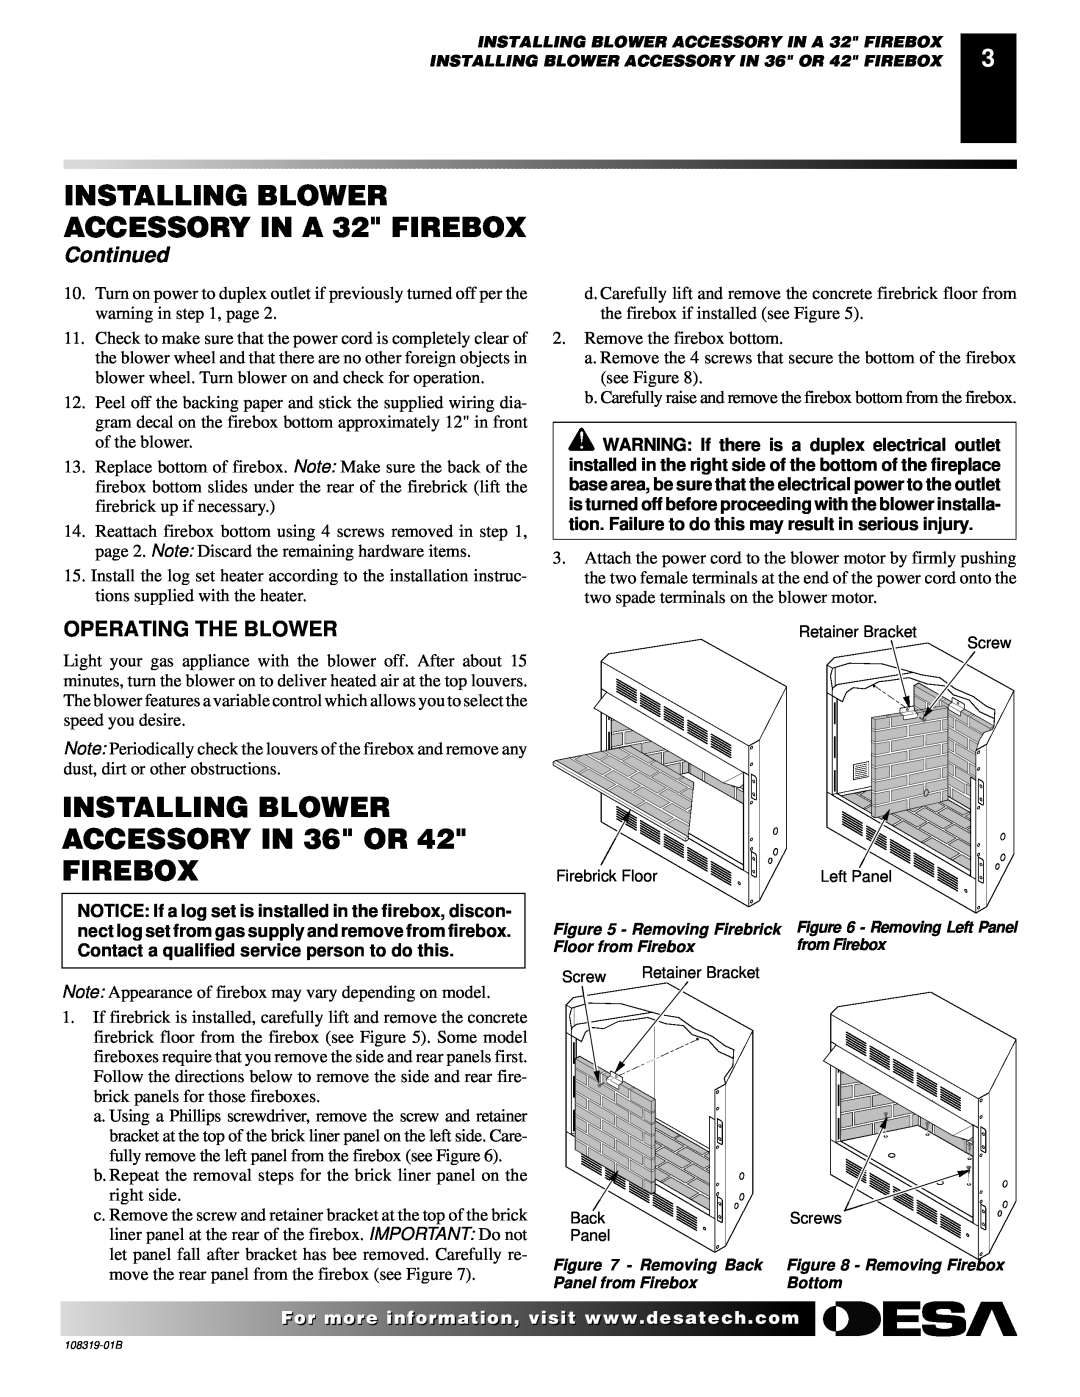 Desa Ga3750a installation instructions INSTALLING BLOWER ACCESSORY IN 36 OR FIREBOX, Continued, Operating The Blower 